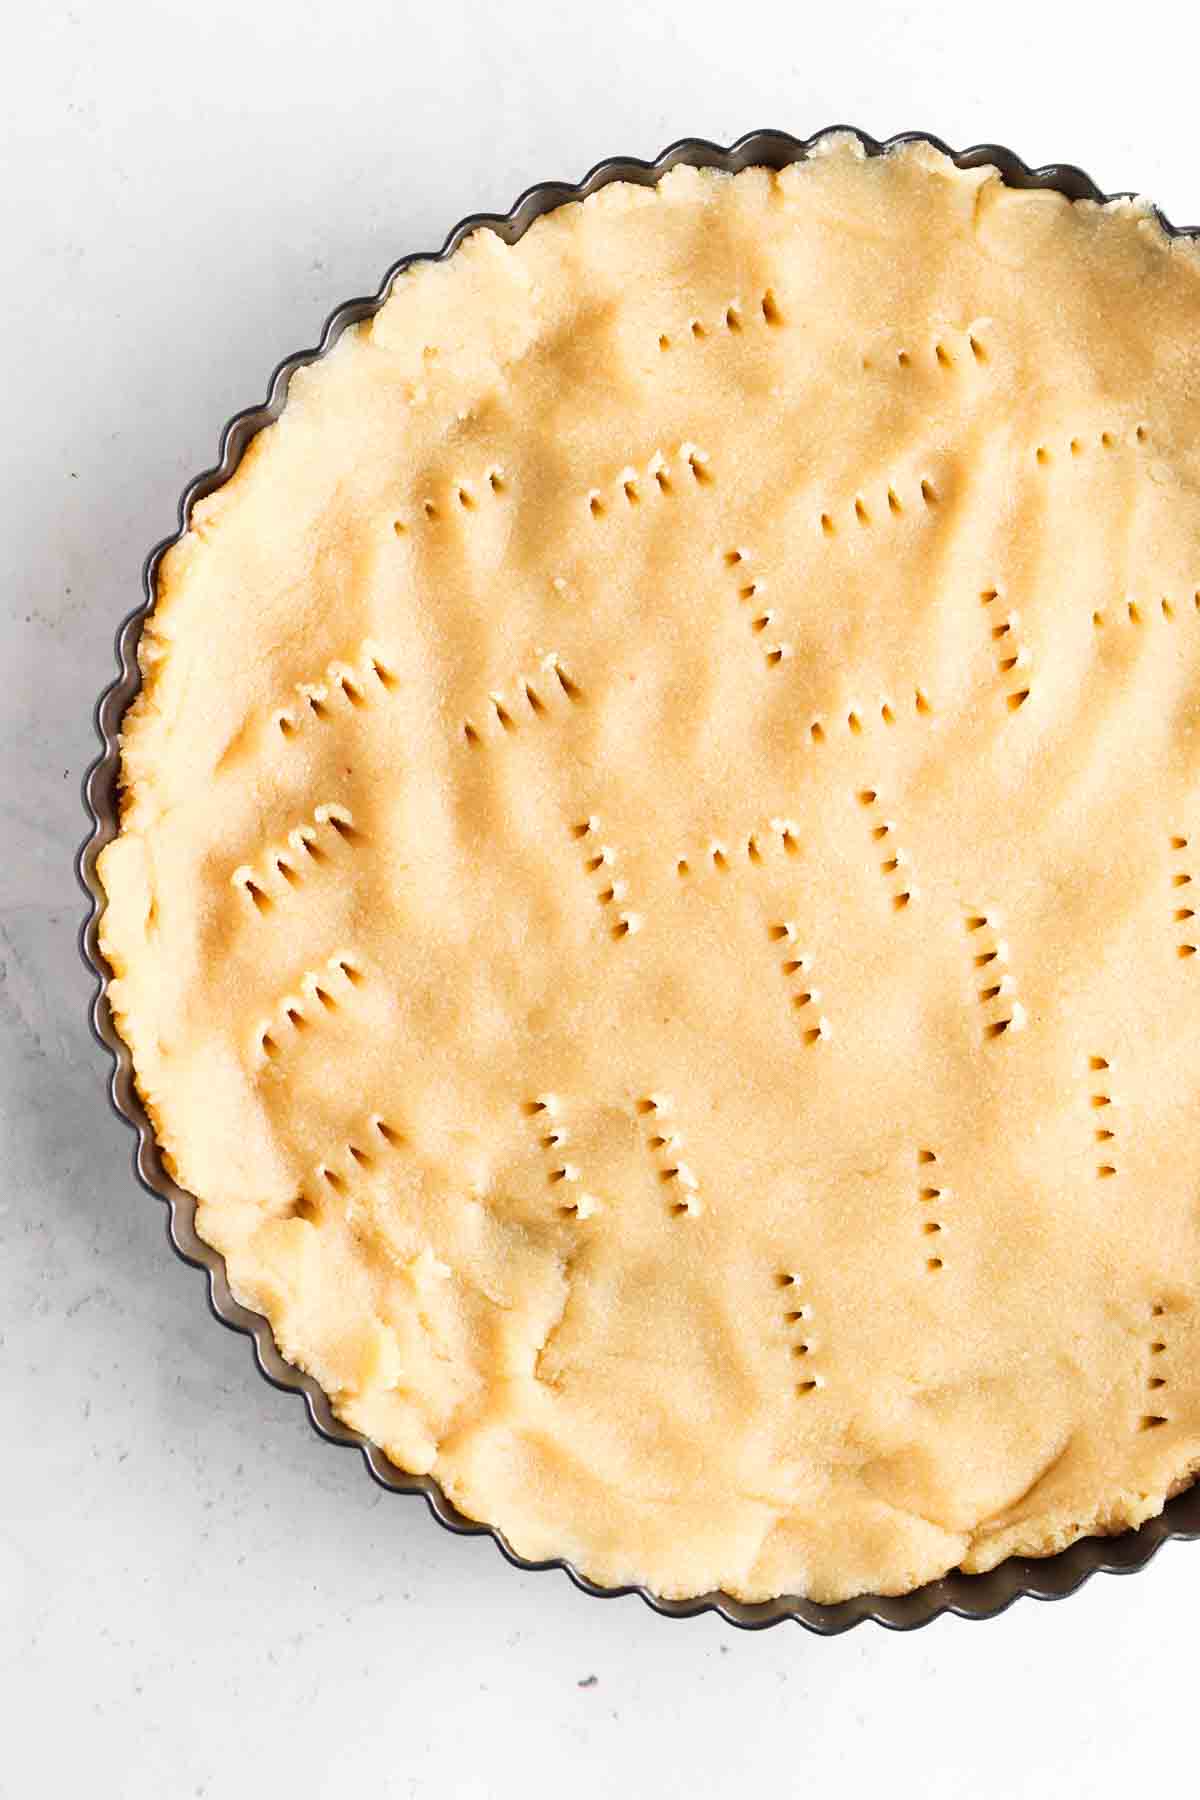 Gluten free tart crust in a tart pan with the crust having poked holes in it.